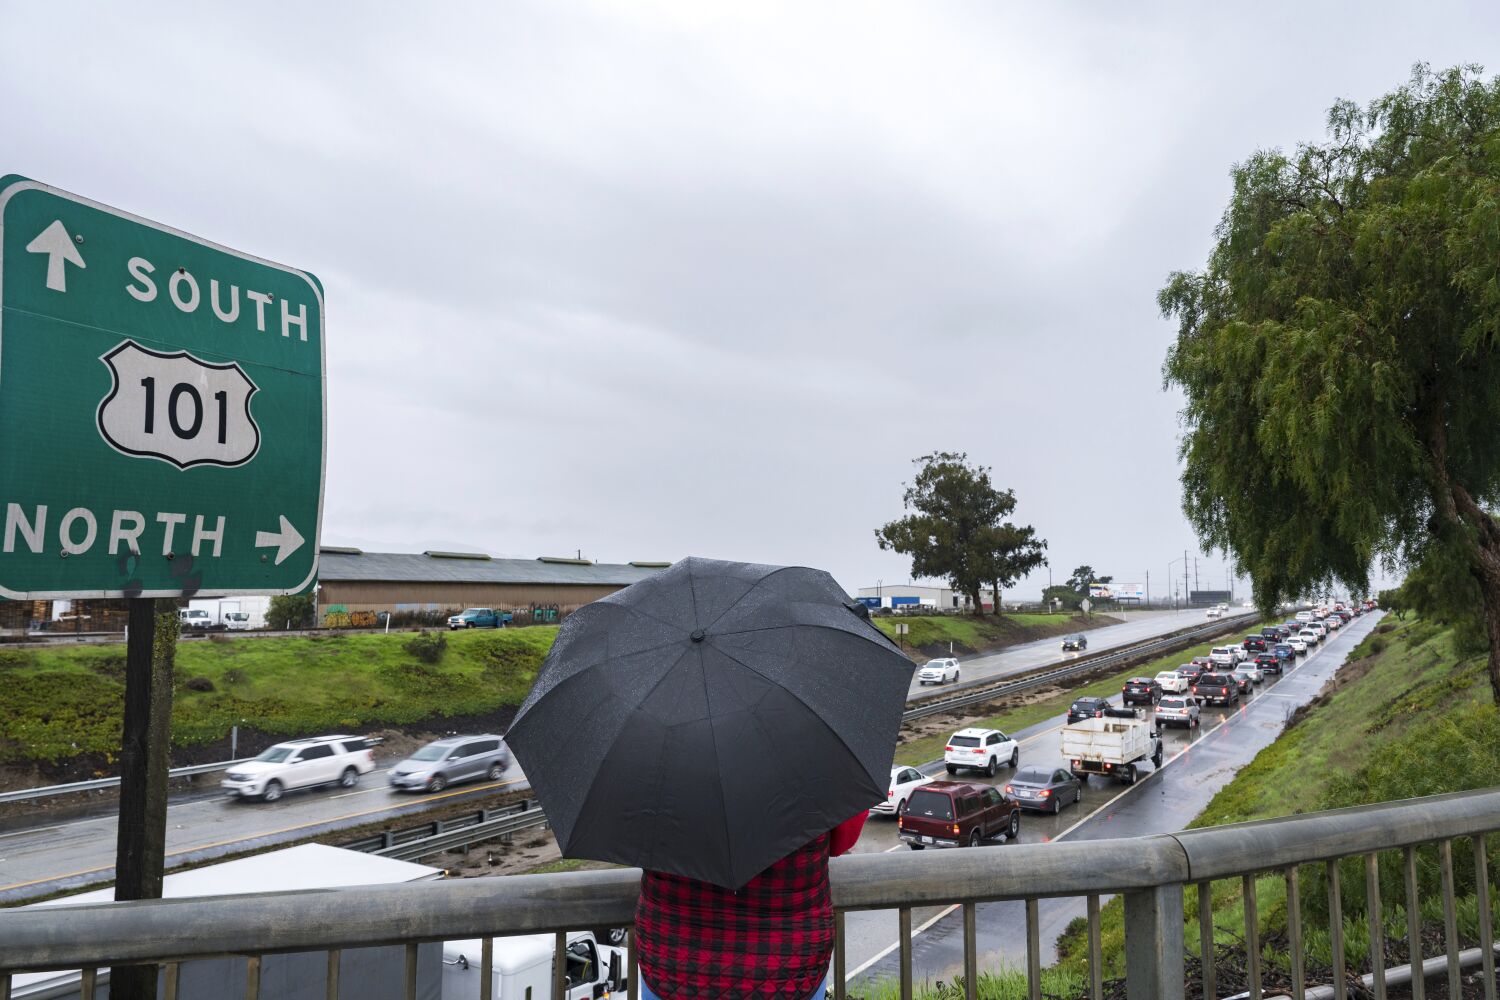 California is due for another massive rainstorm. Here's how to prepare and stay safe